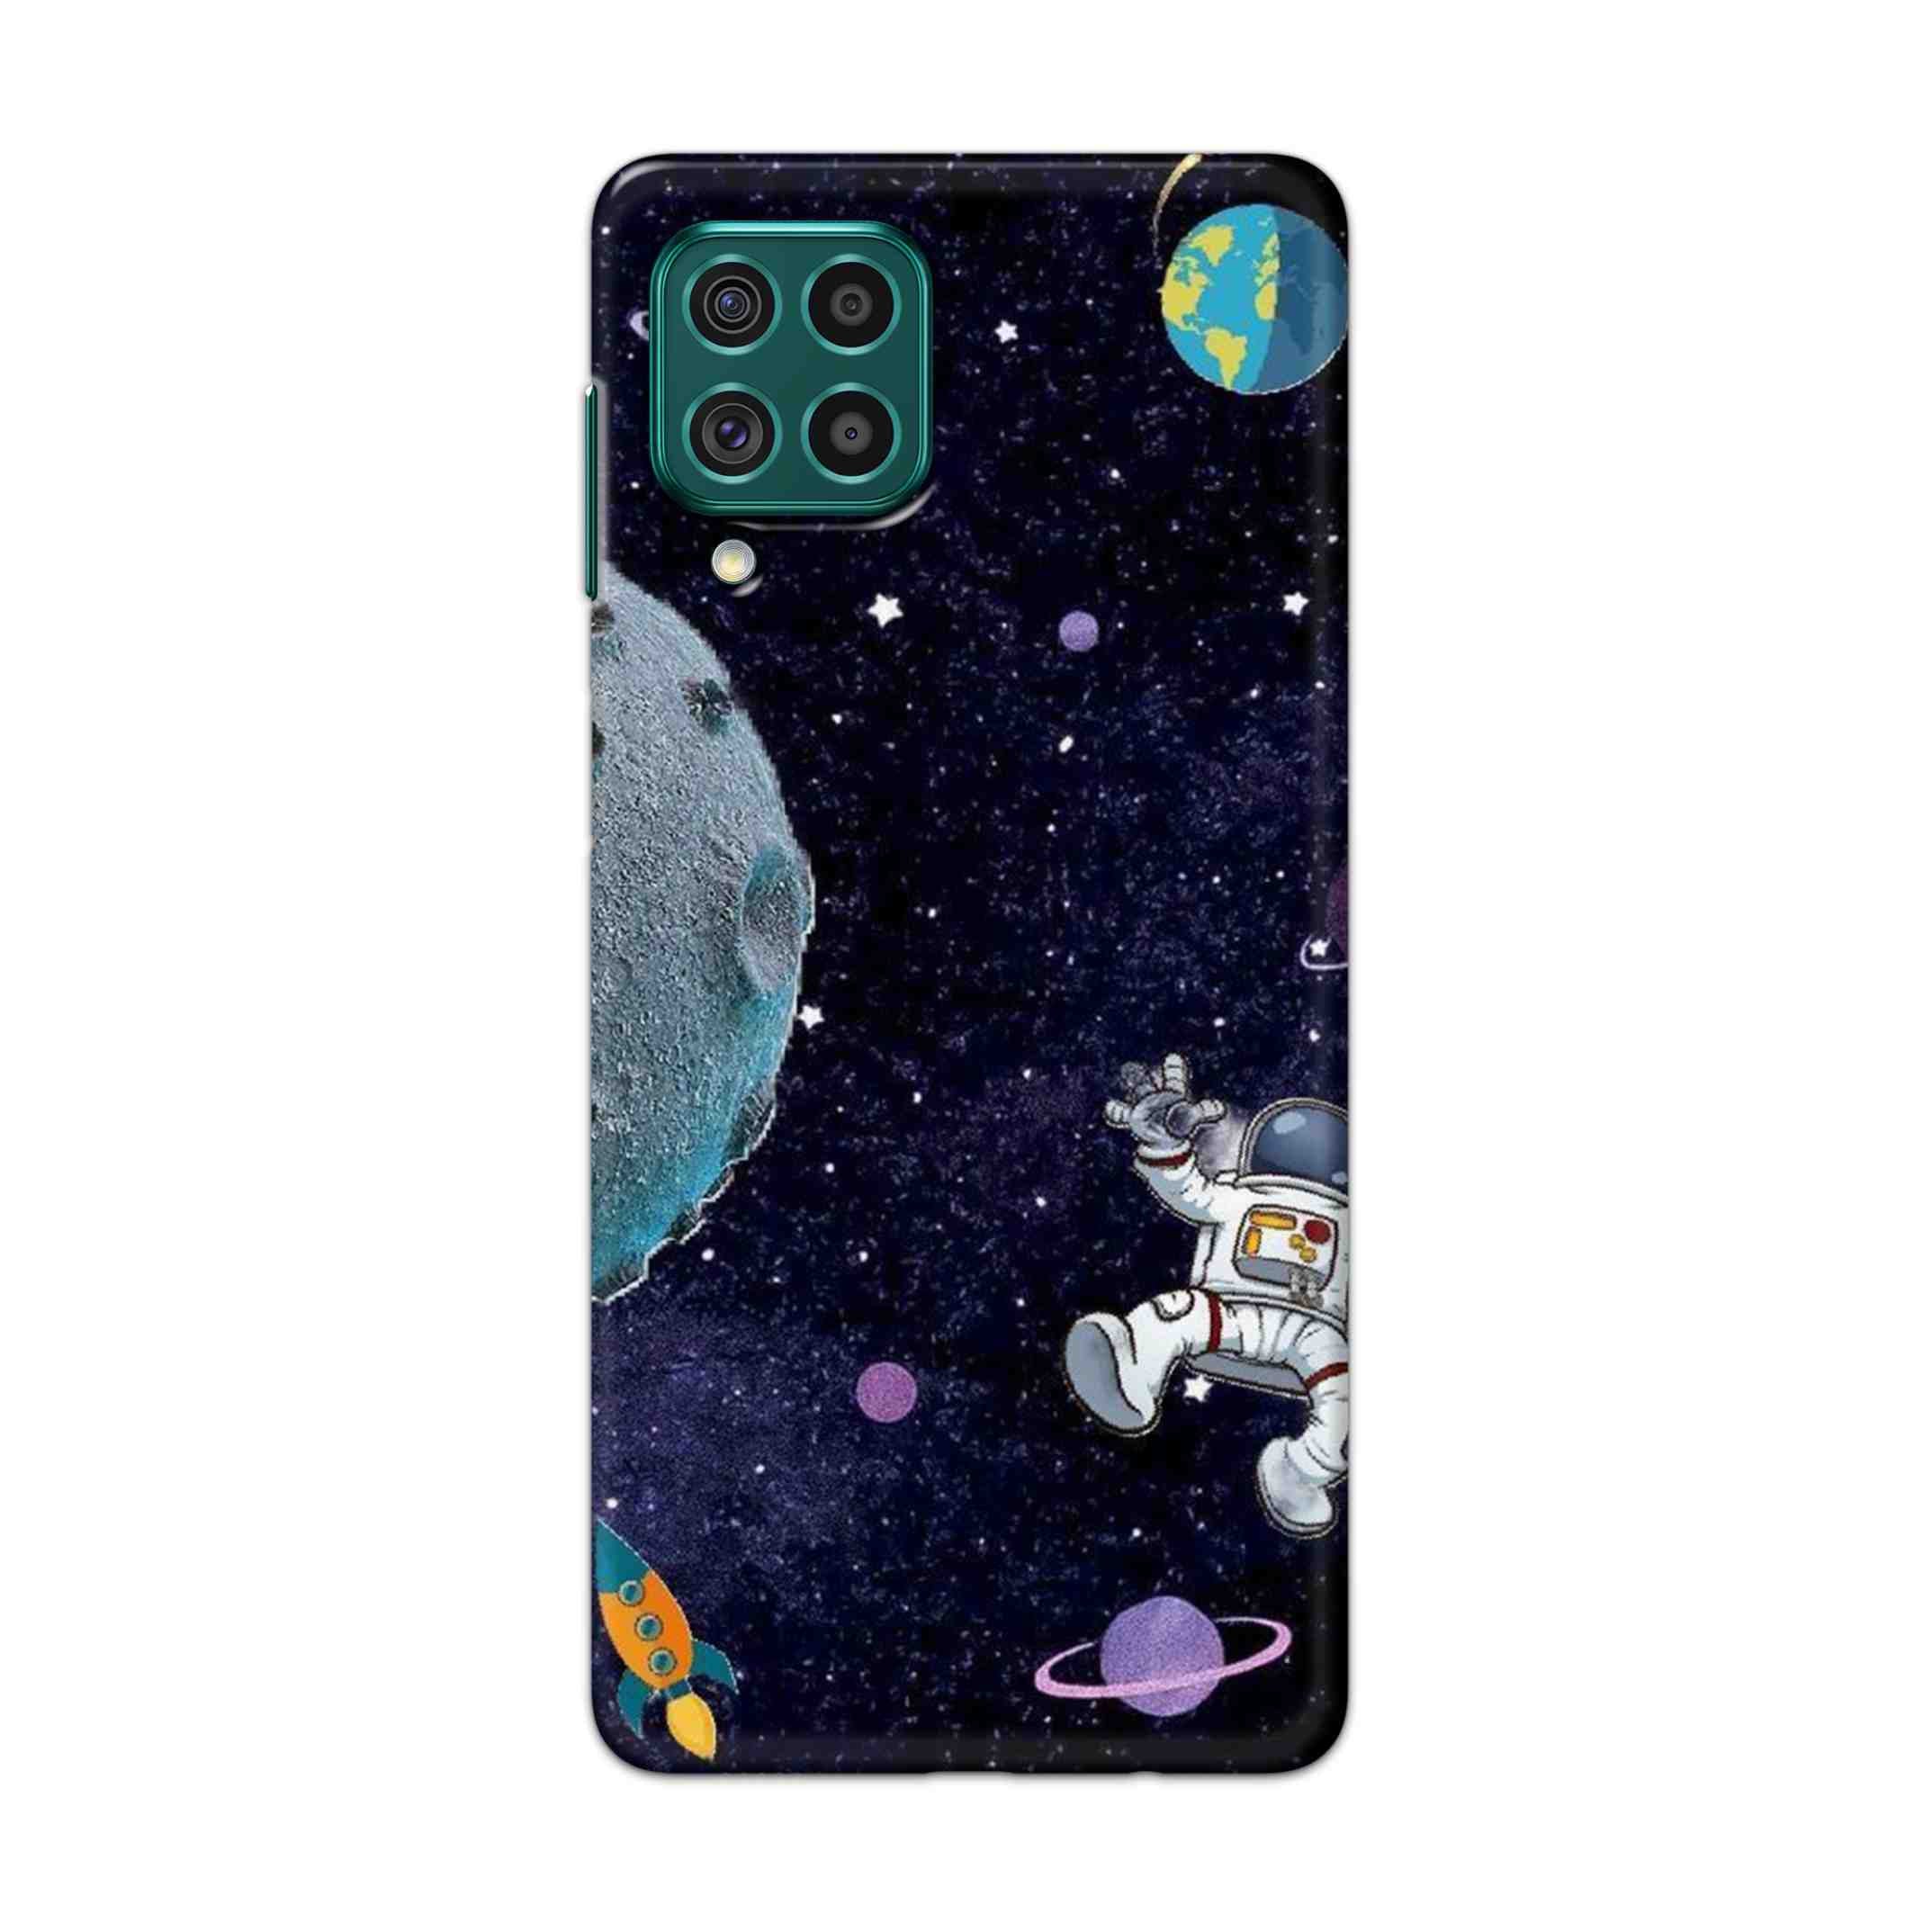 Buy Space Hard Back Mobile Phone Case Cover For Galaxy F62 Online